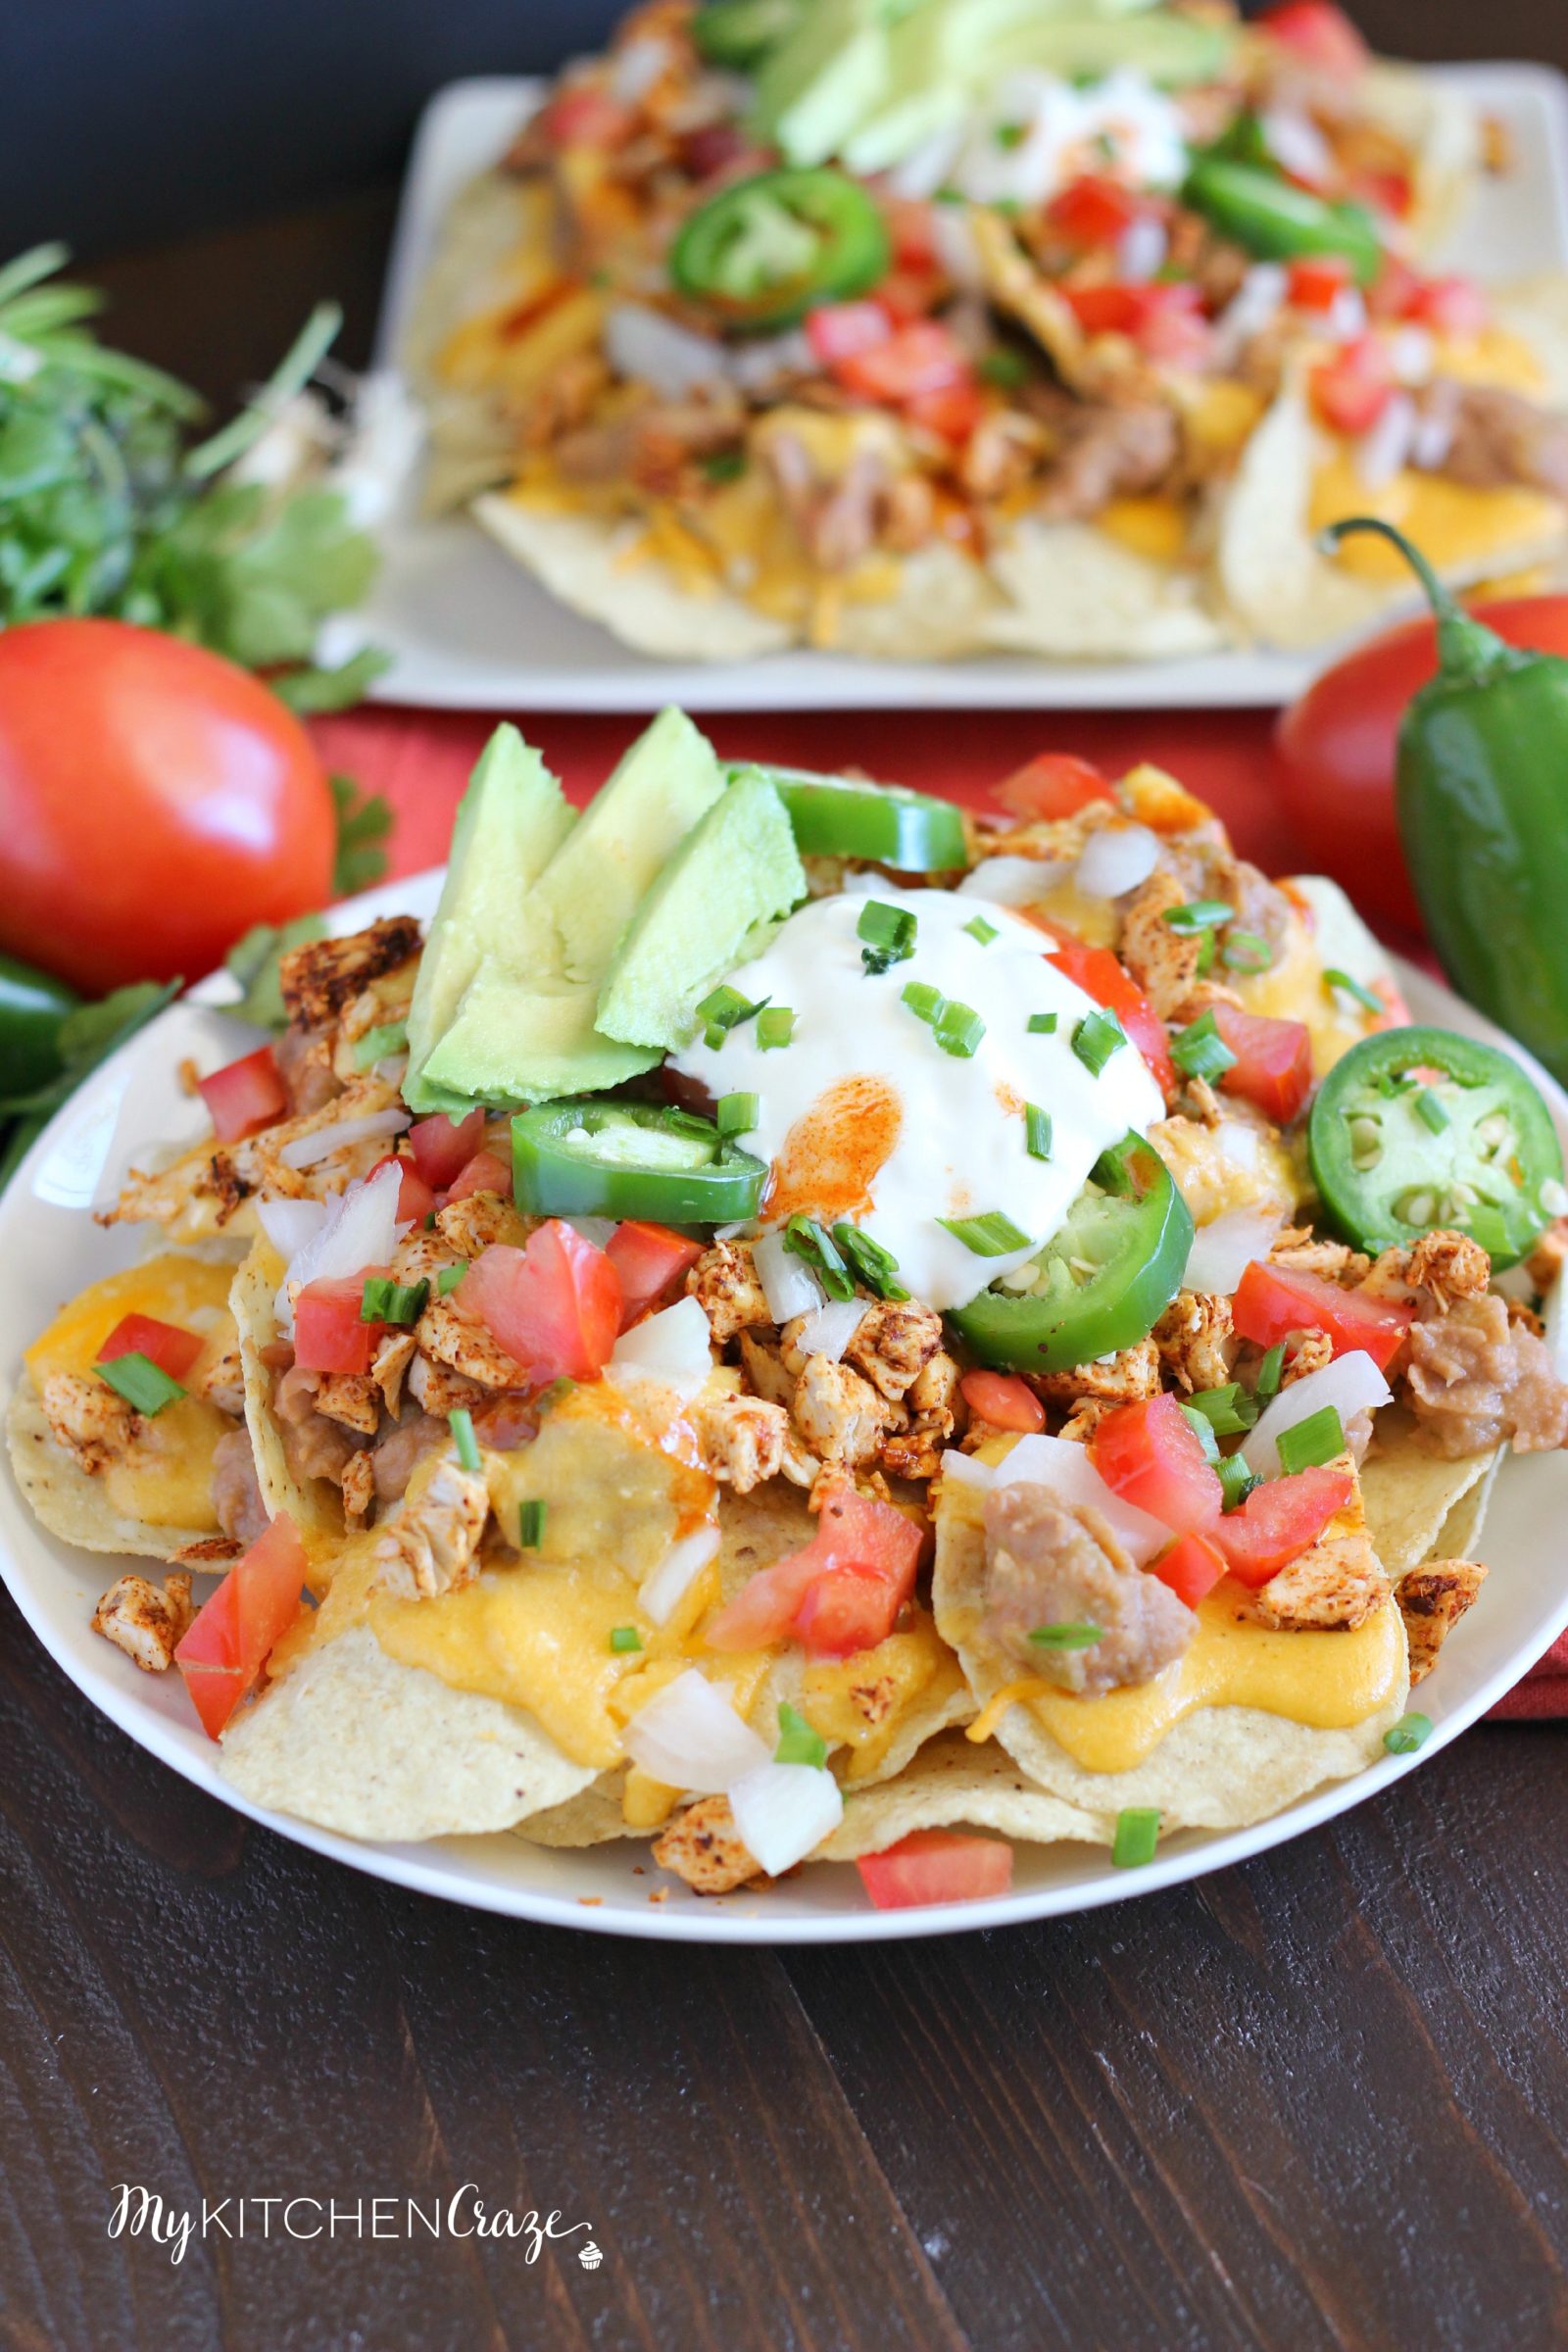 Spicy Turkey Nachos ~ mykitchencraze.com ~ Perfect way to use up the leftover turkey from Thanksgiving. Plus they're delicious and a breeze to whip up!